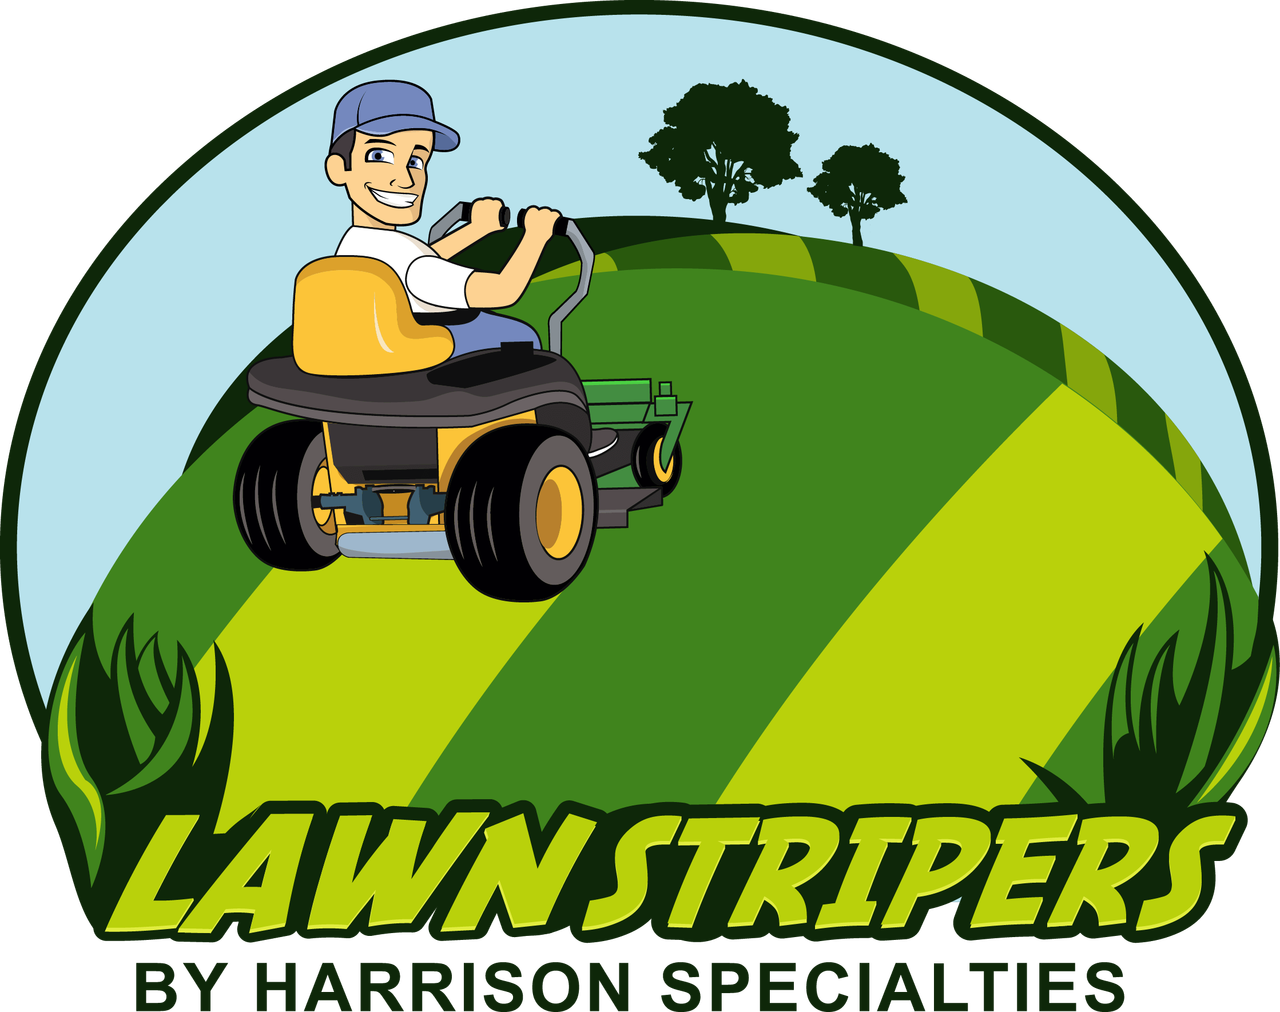 Lawn Striping Kit For 2010 John Deere 950a With 60" - Lawn (1600x1265)